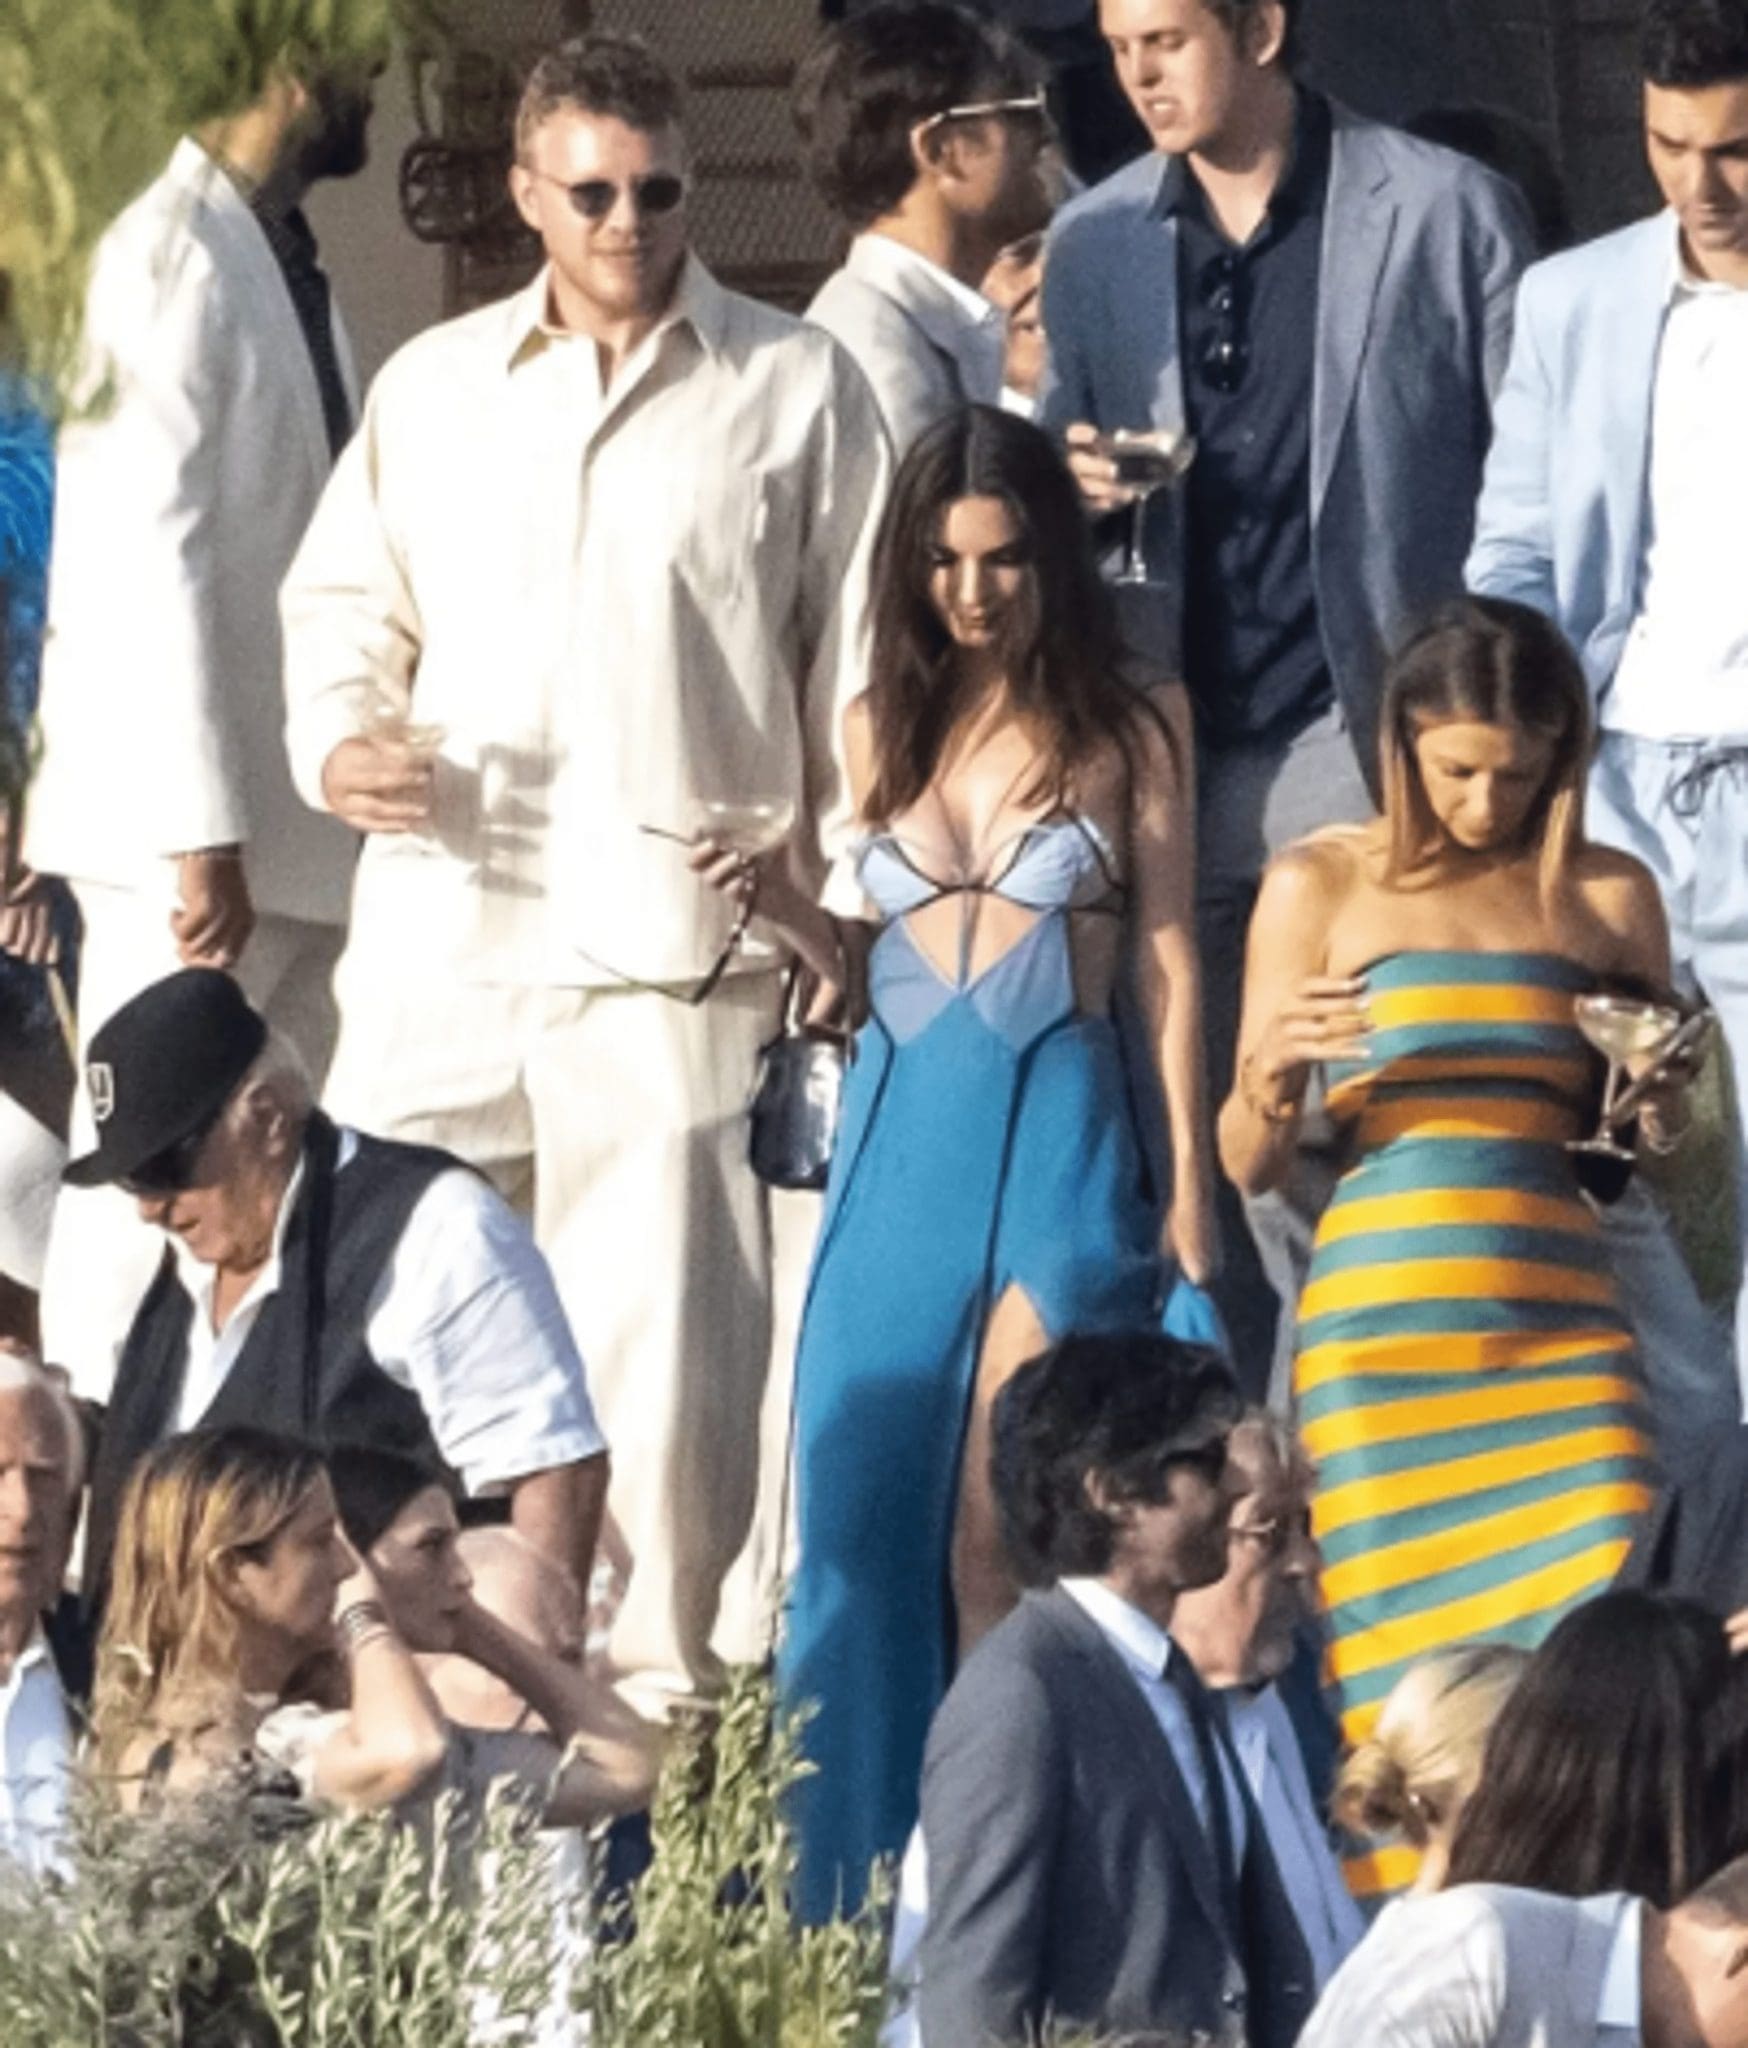 Emily Ratajkowski came to the wedding of a Hollywood Ari Emanuel in an open dress